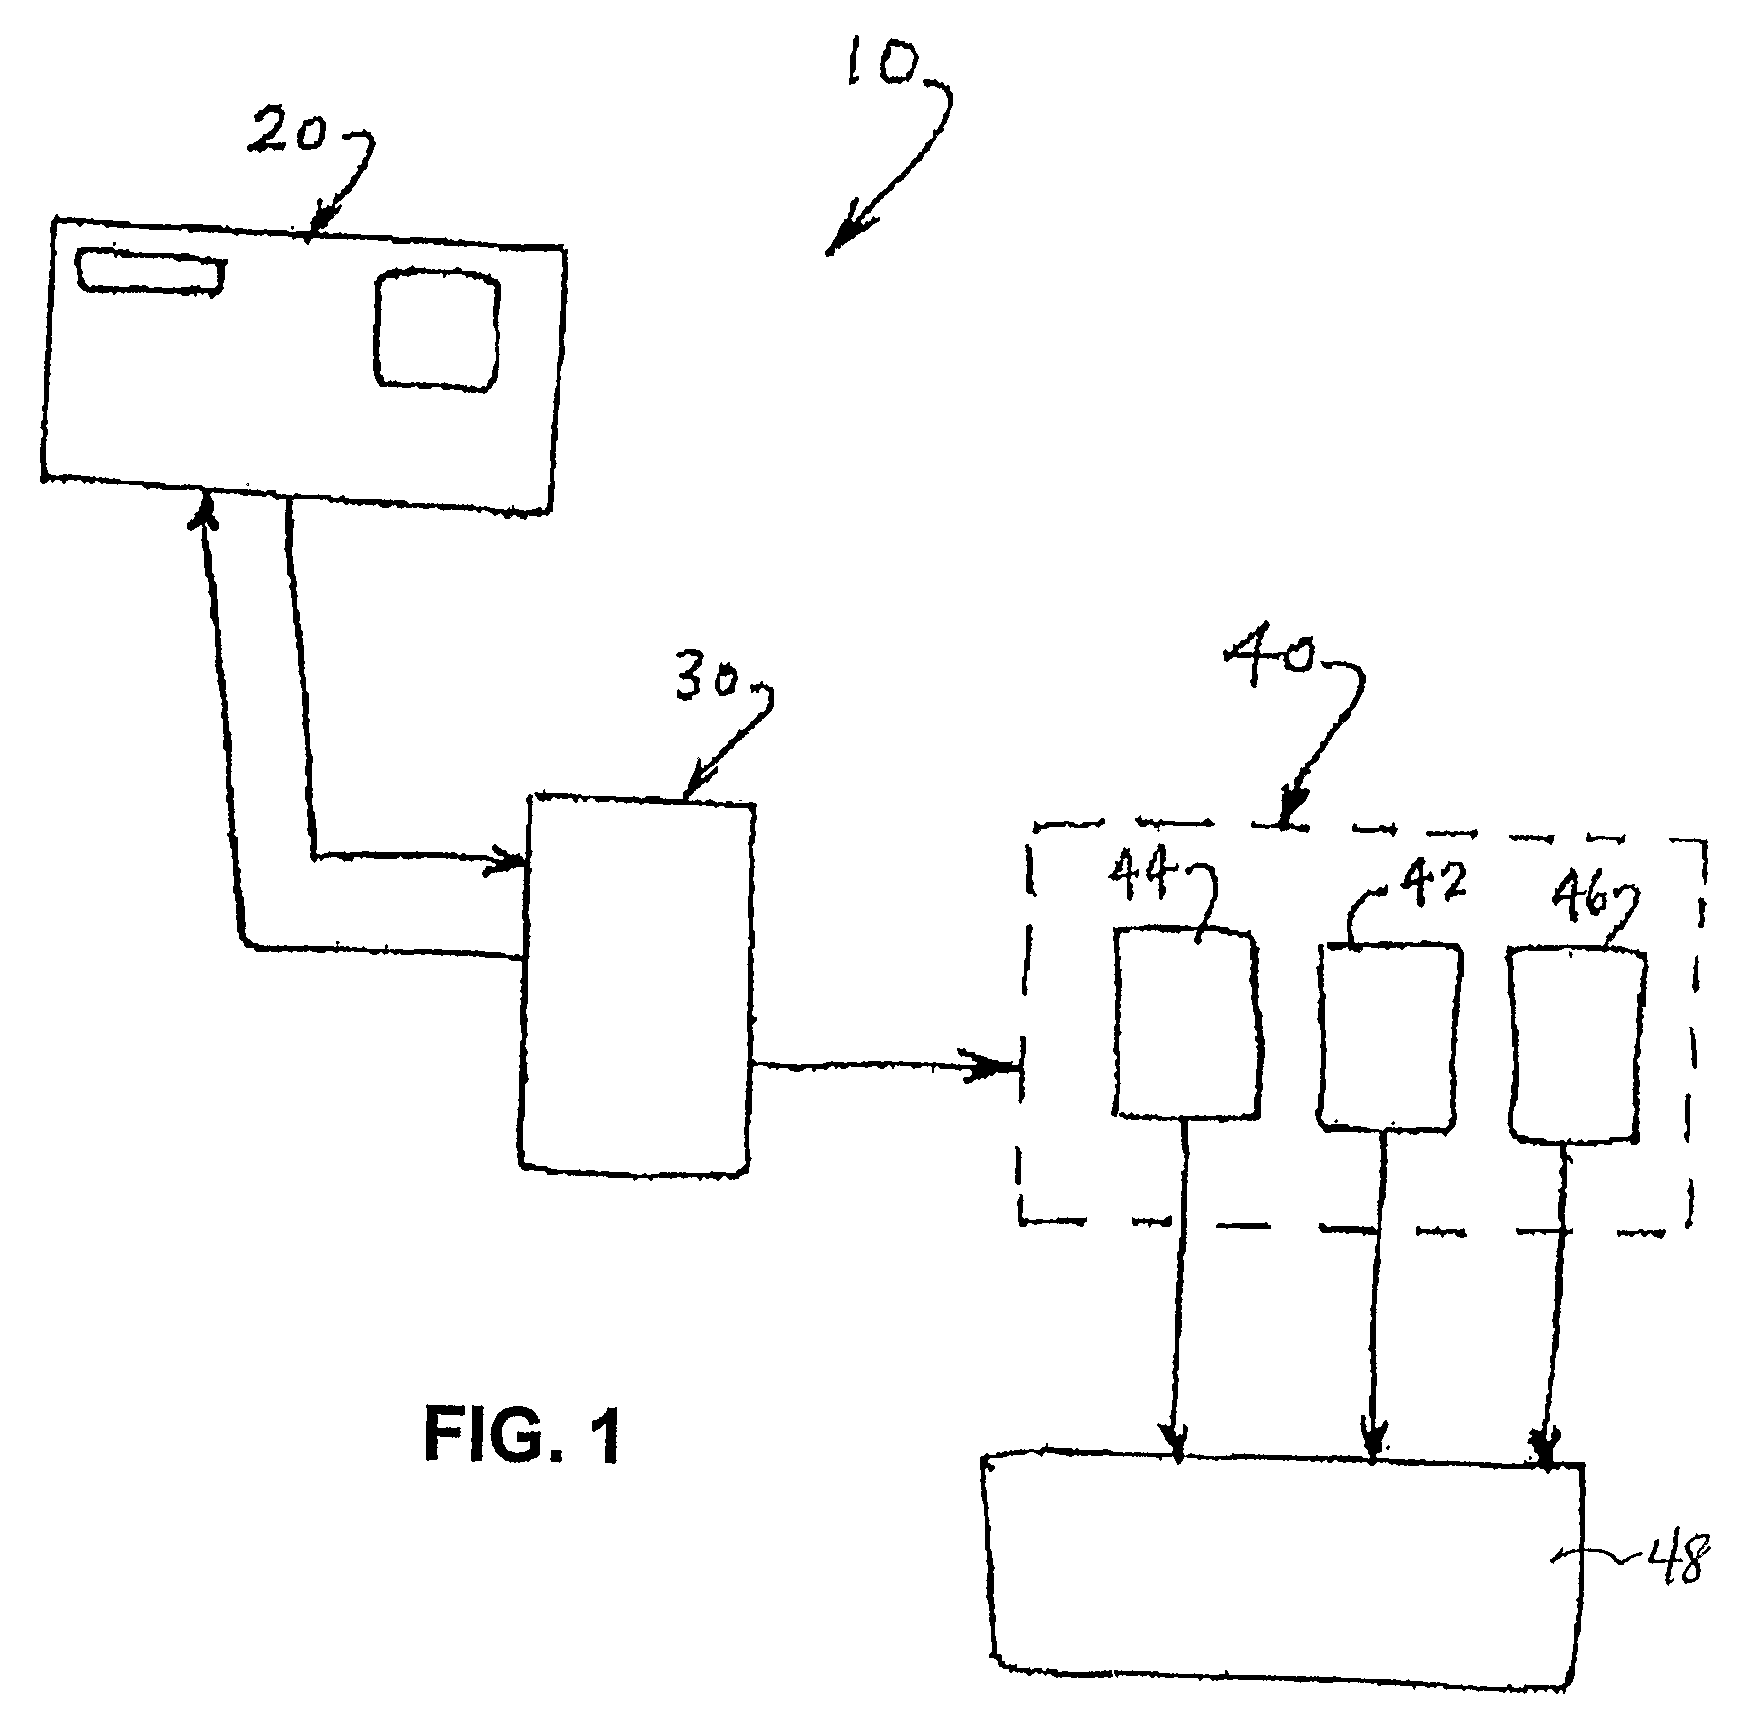 Balanced physiological monitoring and treatment system